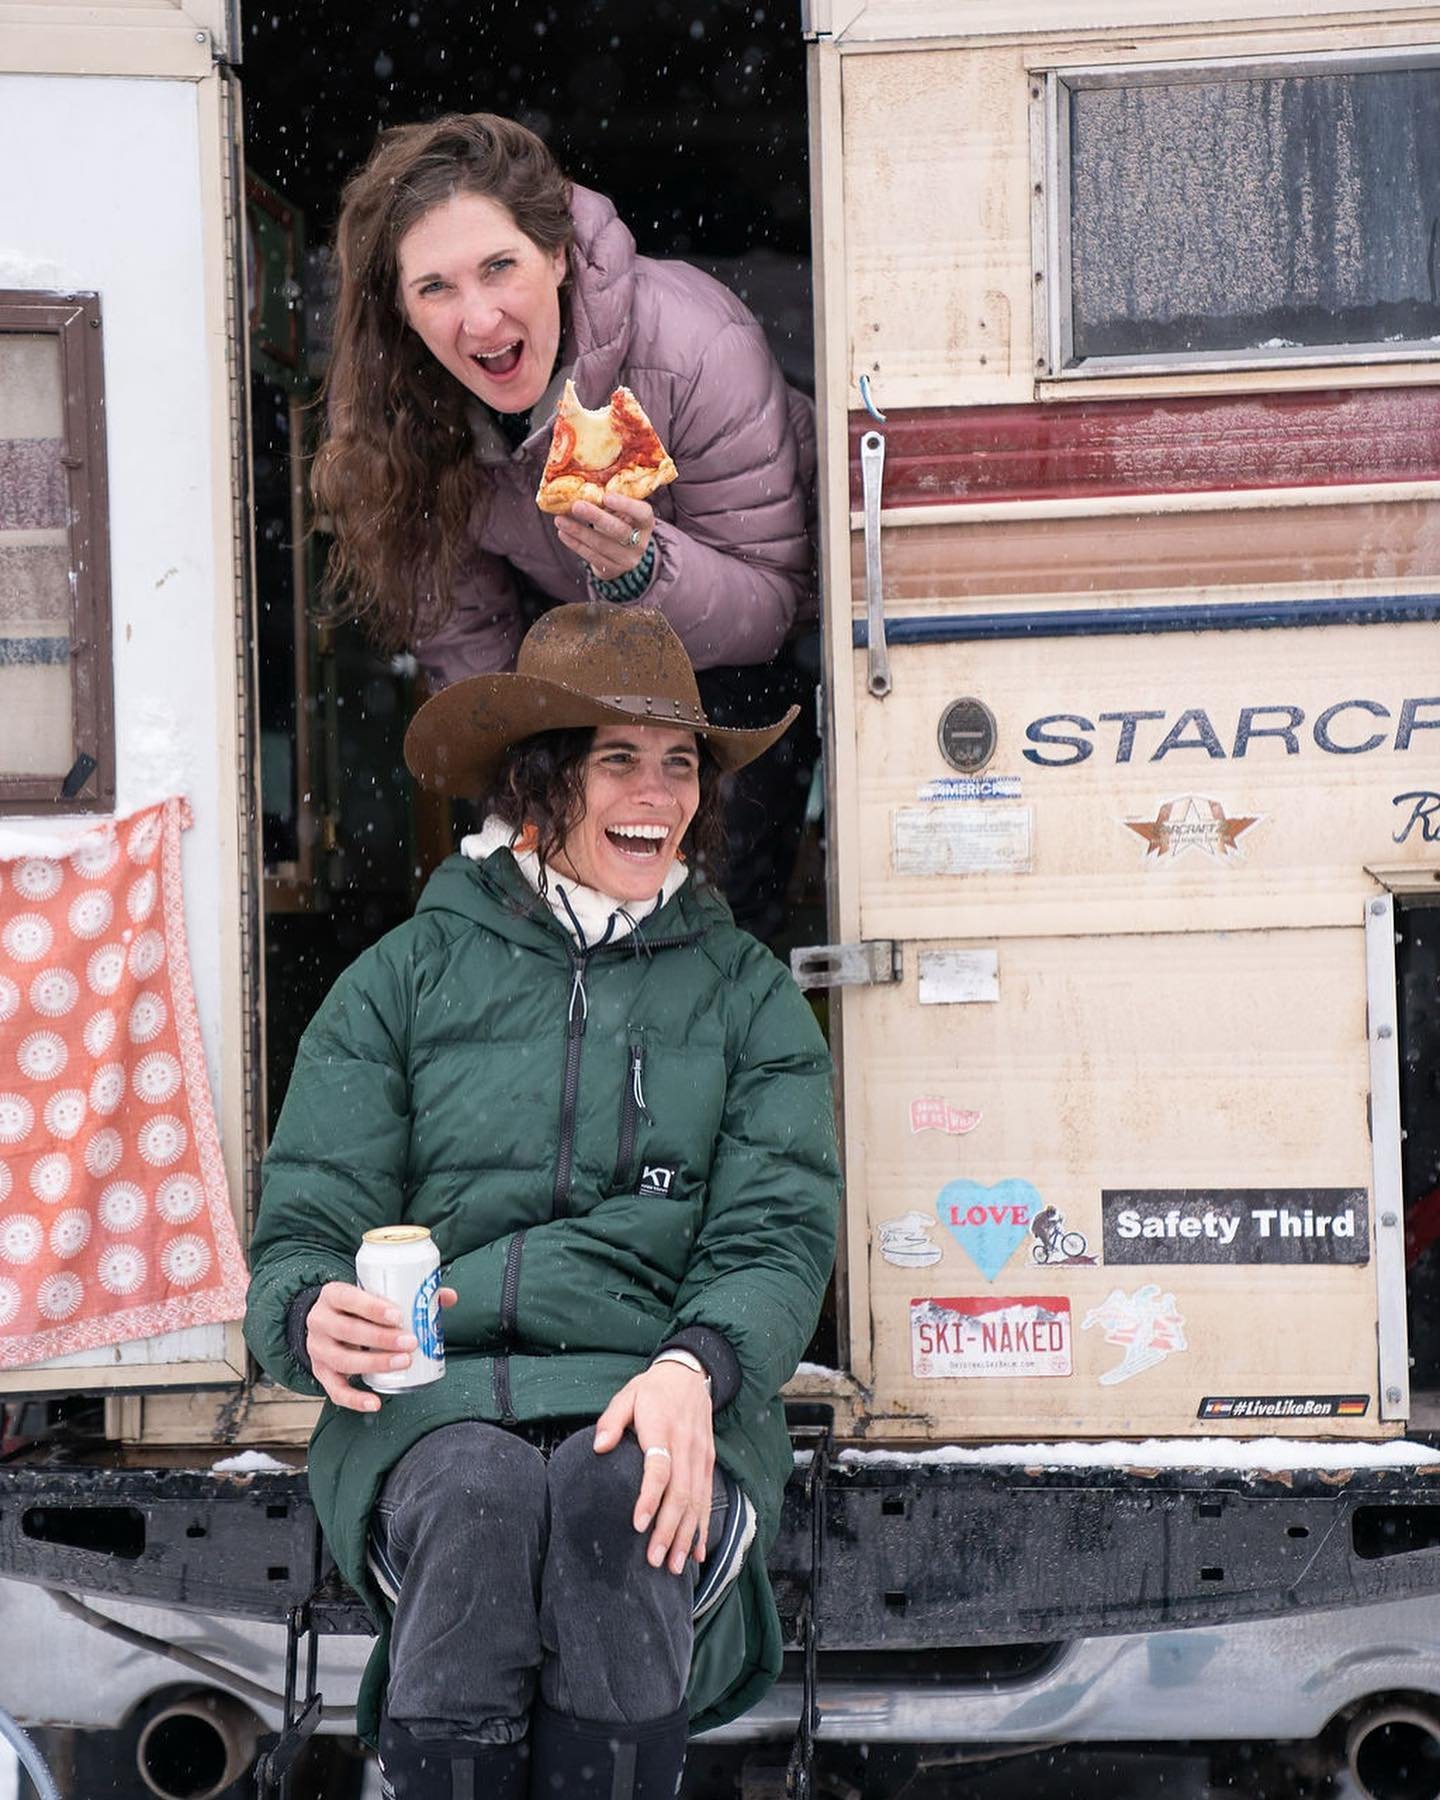 just your winter pic of @jennnnygirl and I in a truck having fun 🤘🏽

@boottanfest @buck.wild.coffee #friendship #pizza #coffee #truckcamper #colorado #buckwild